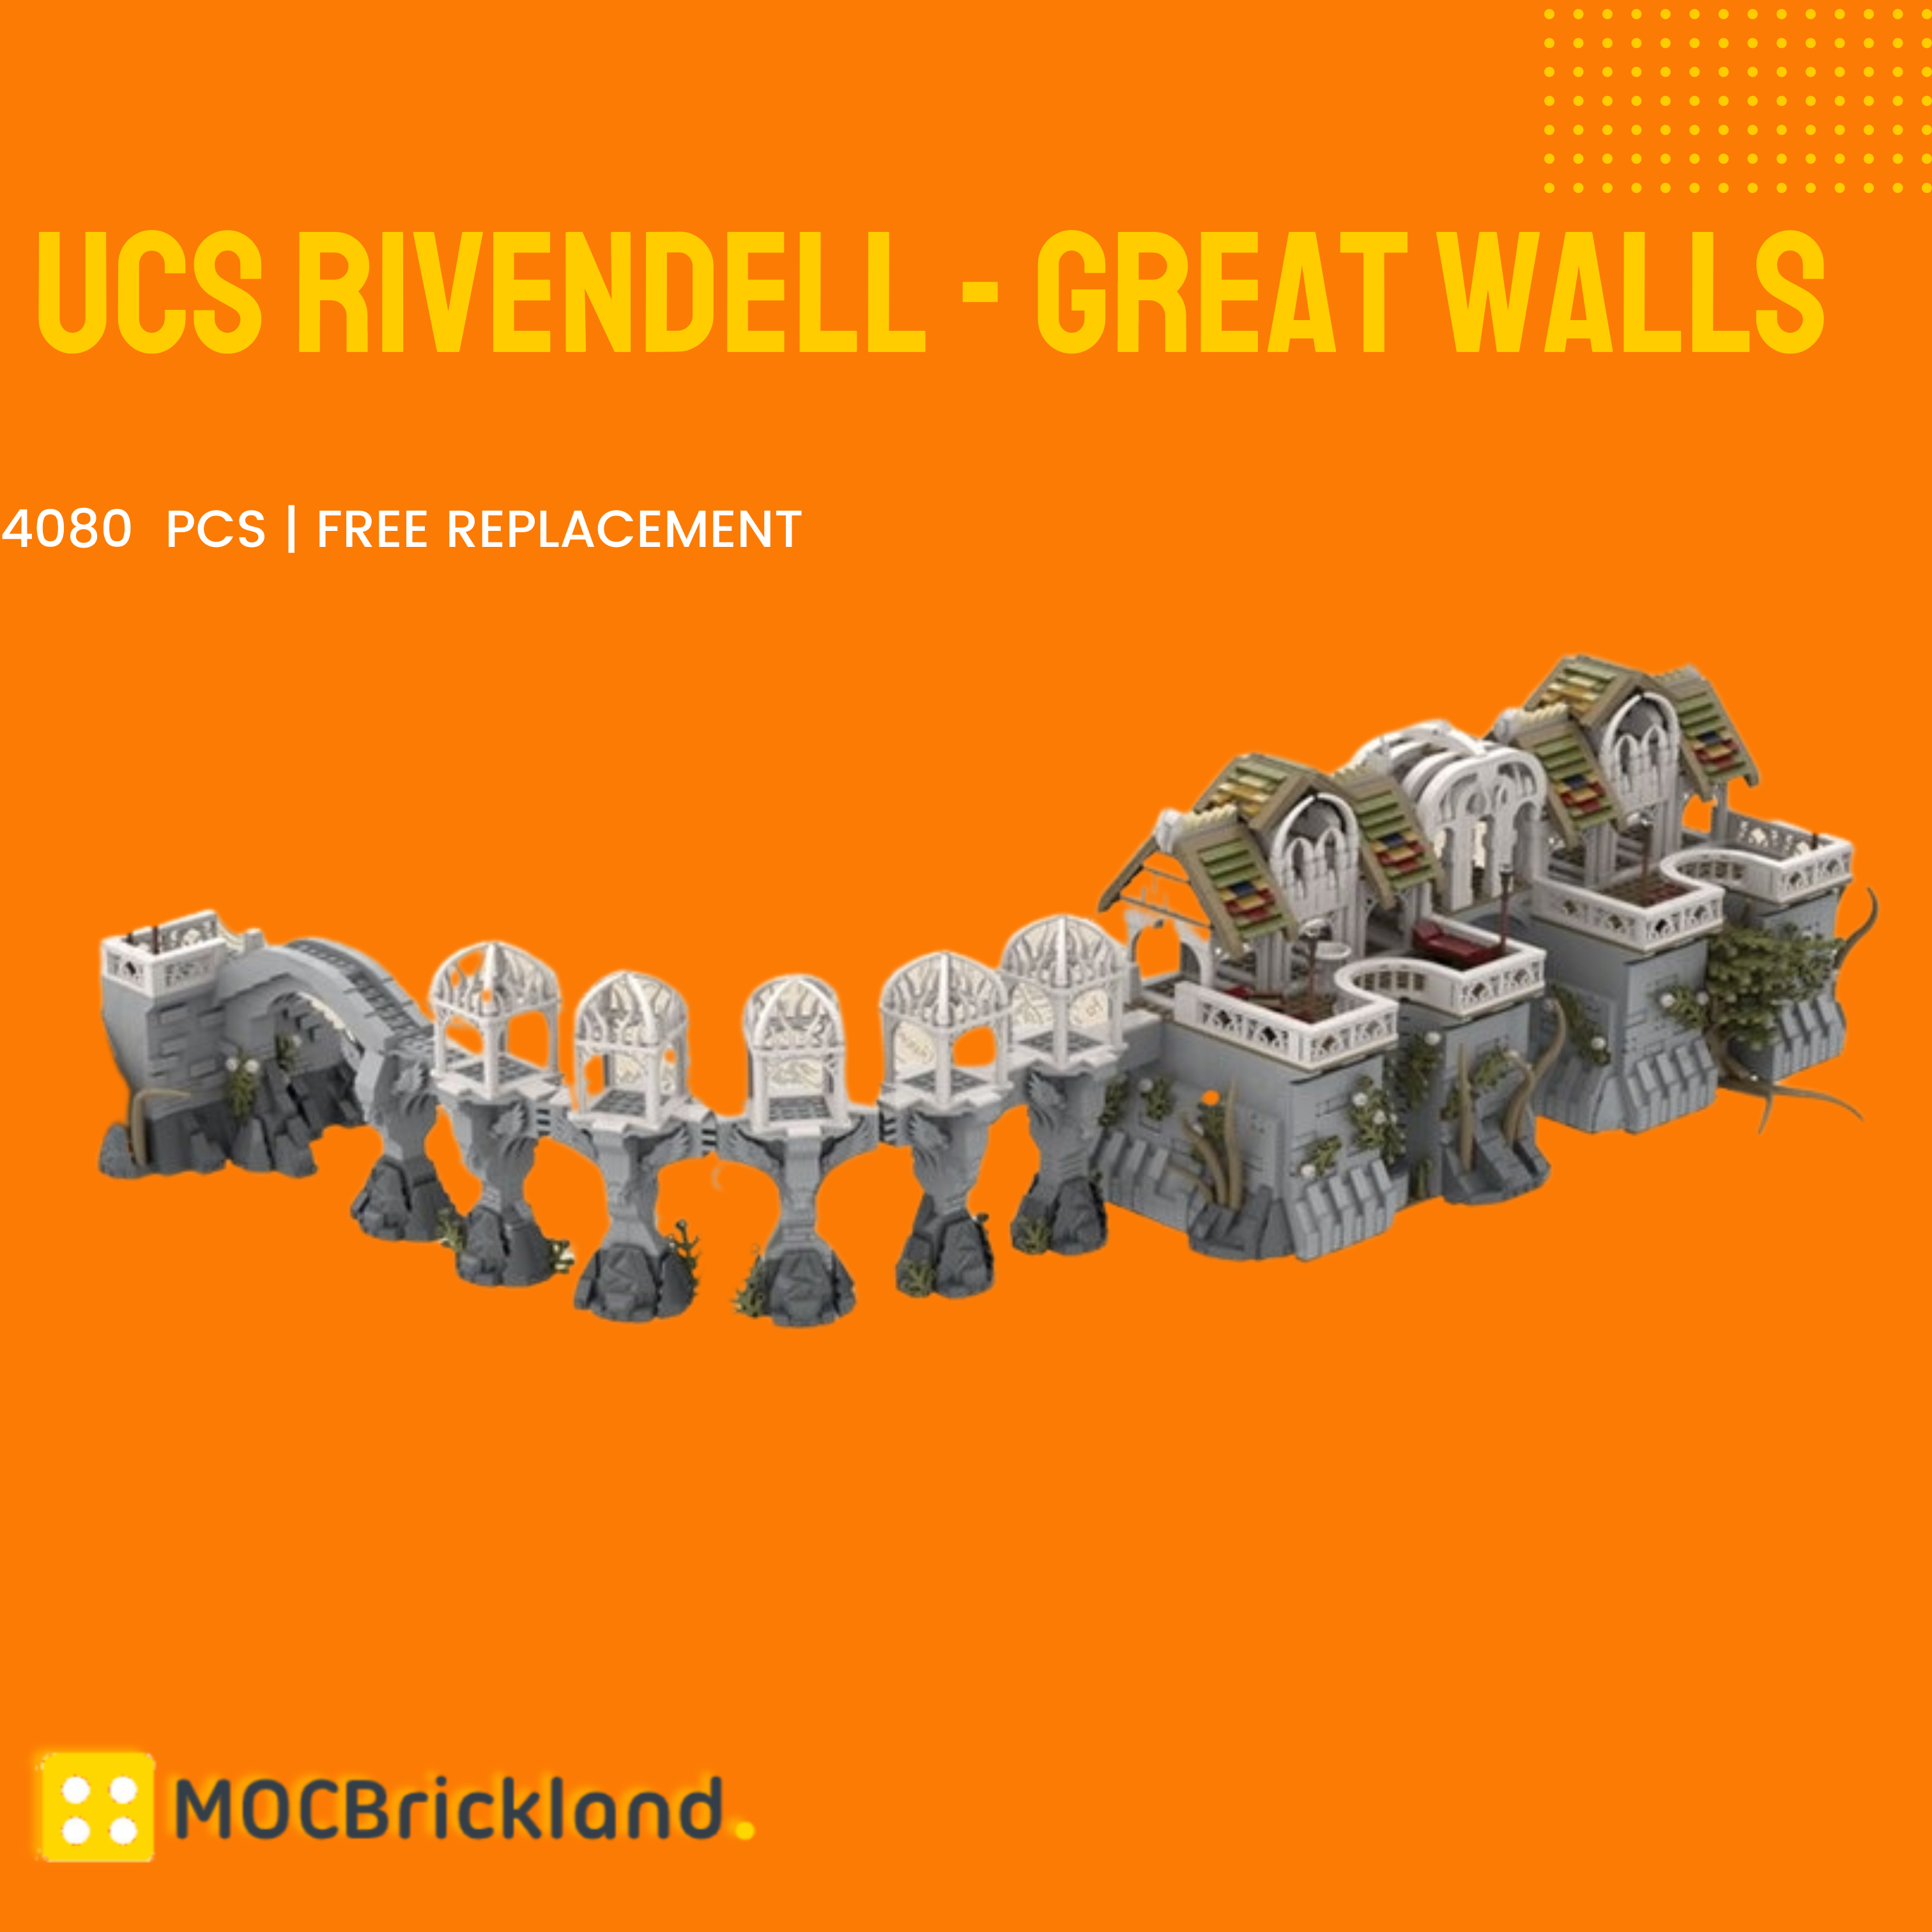 UCS Rivendell - Great Walls MOC-49577 Modular Building With 4080 Pieces